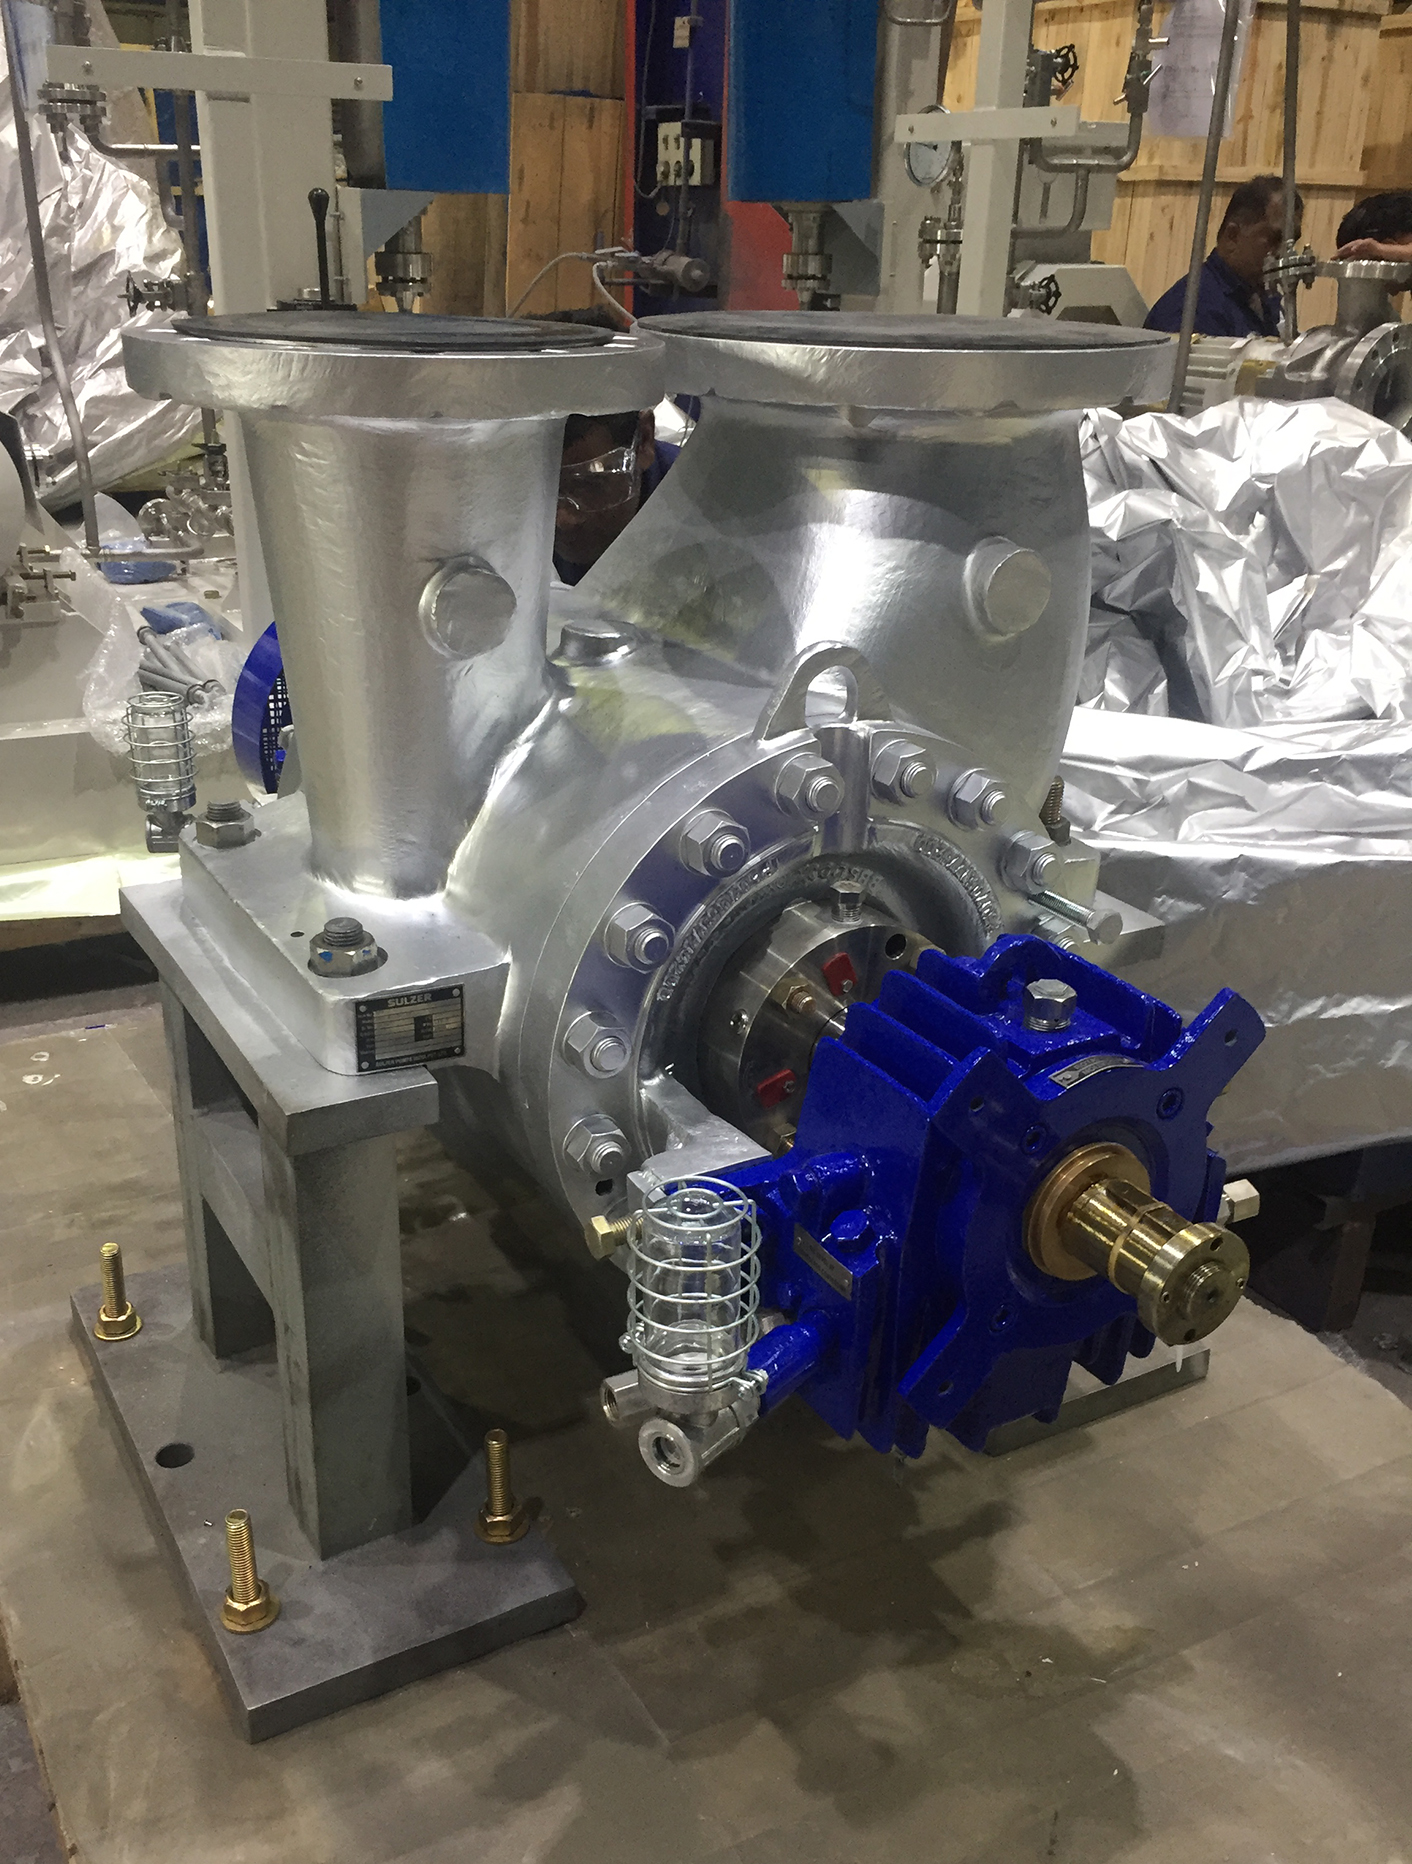 Sulzer’s OEM-X line service provided an upgraded design that unlocked the efficiency, reliability and performance levels operators desired.